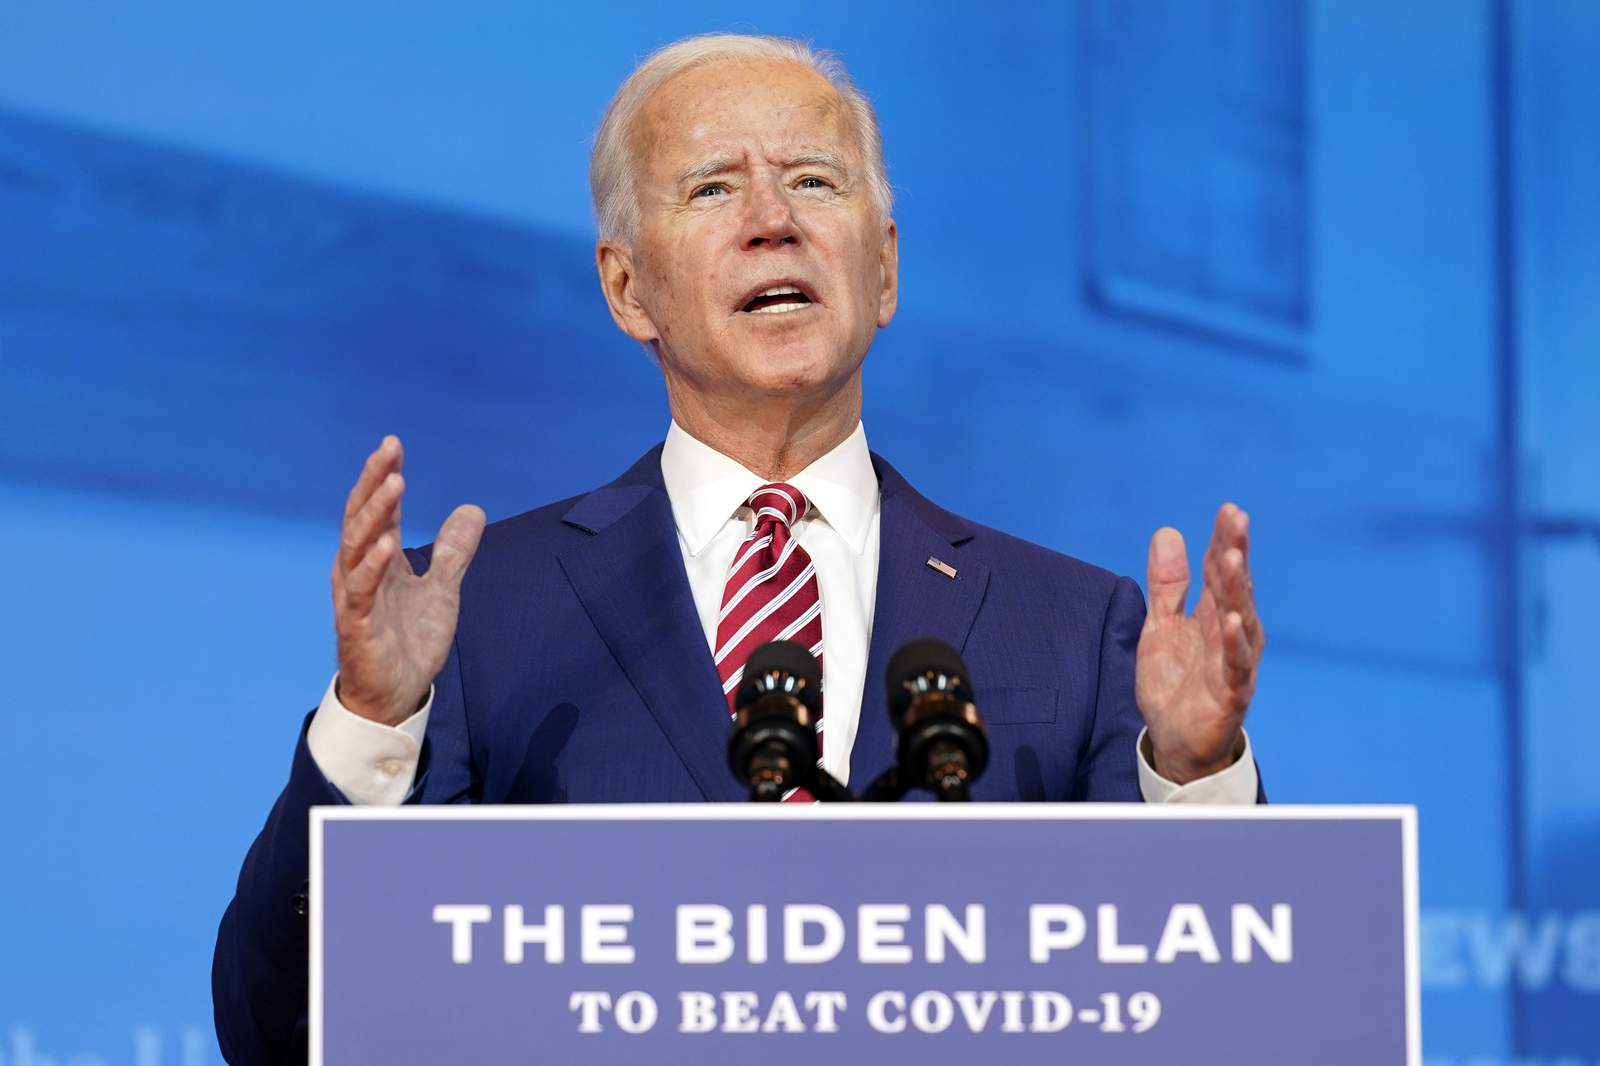 Court records: Man had guns, search online for Biden home